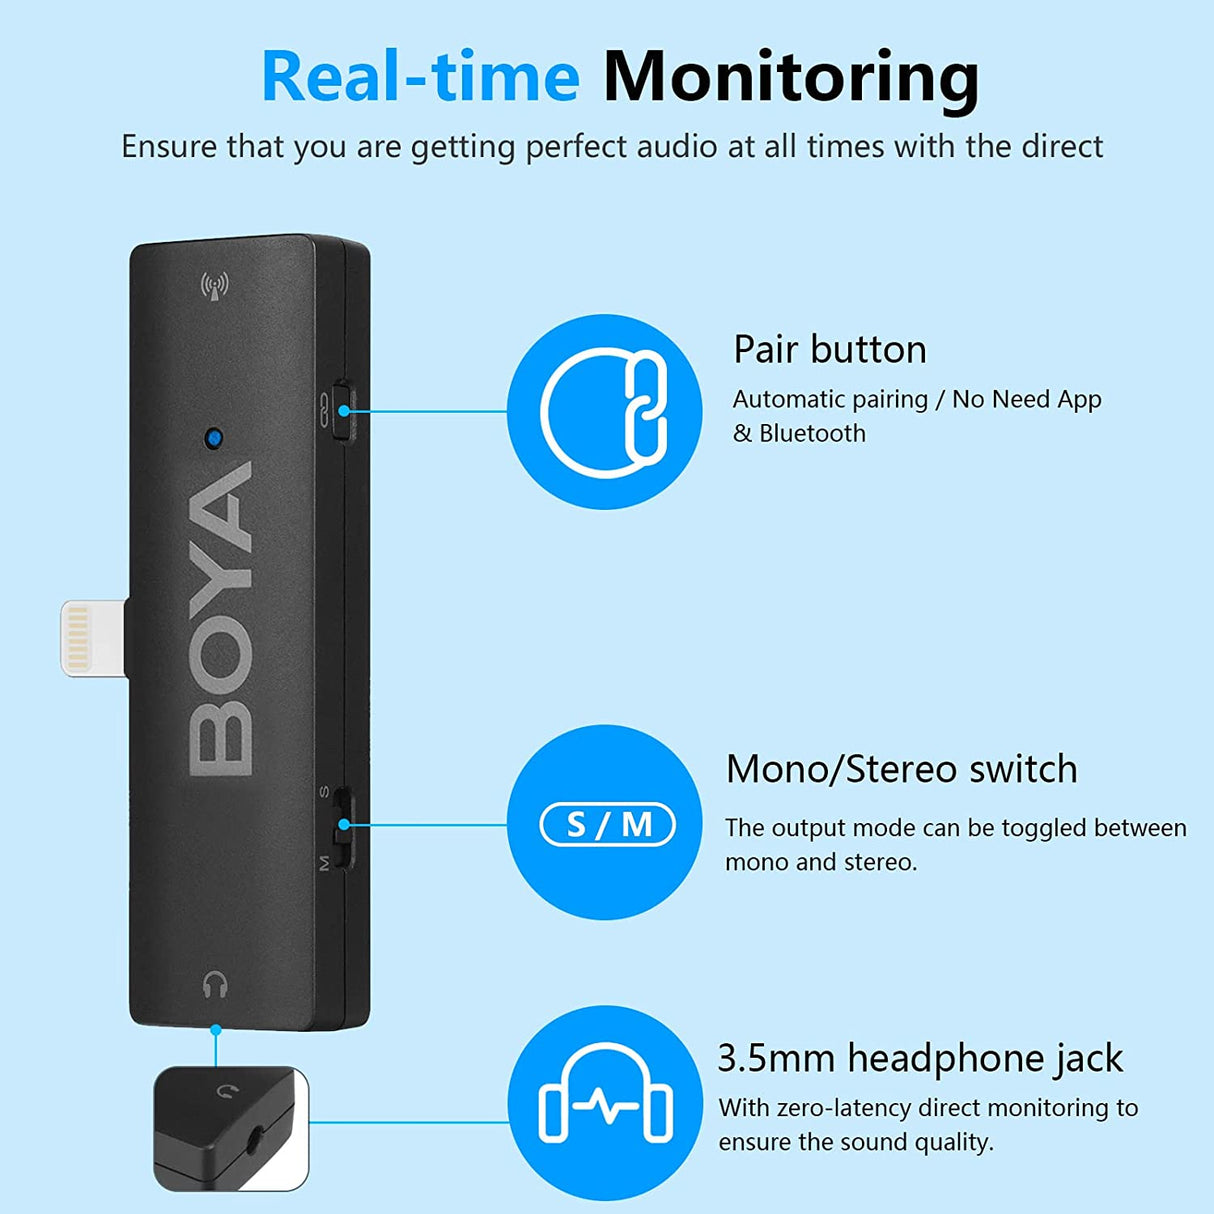 BOYA BY-XM6-K4 DUAL CHANNEL WIRELESS MICROPHONE FOR I-PHONE DEVICES